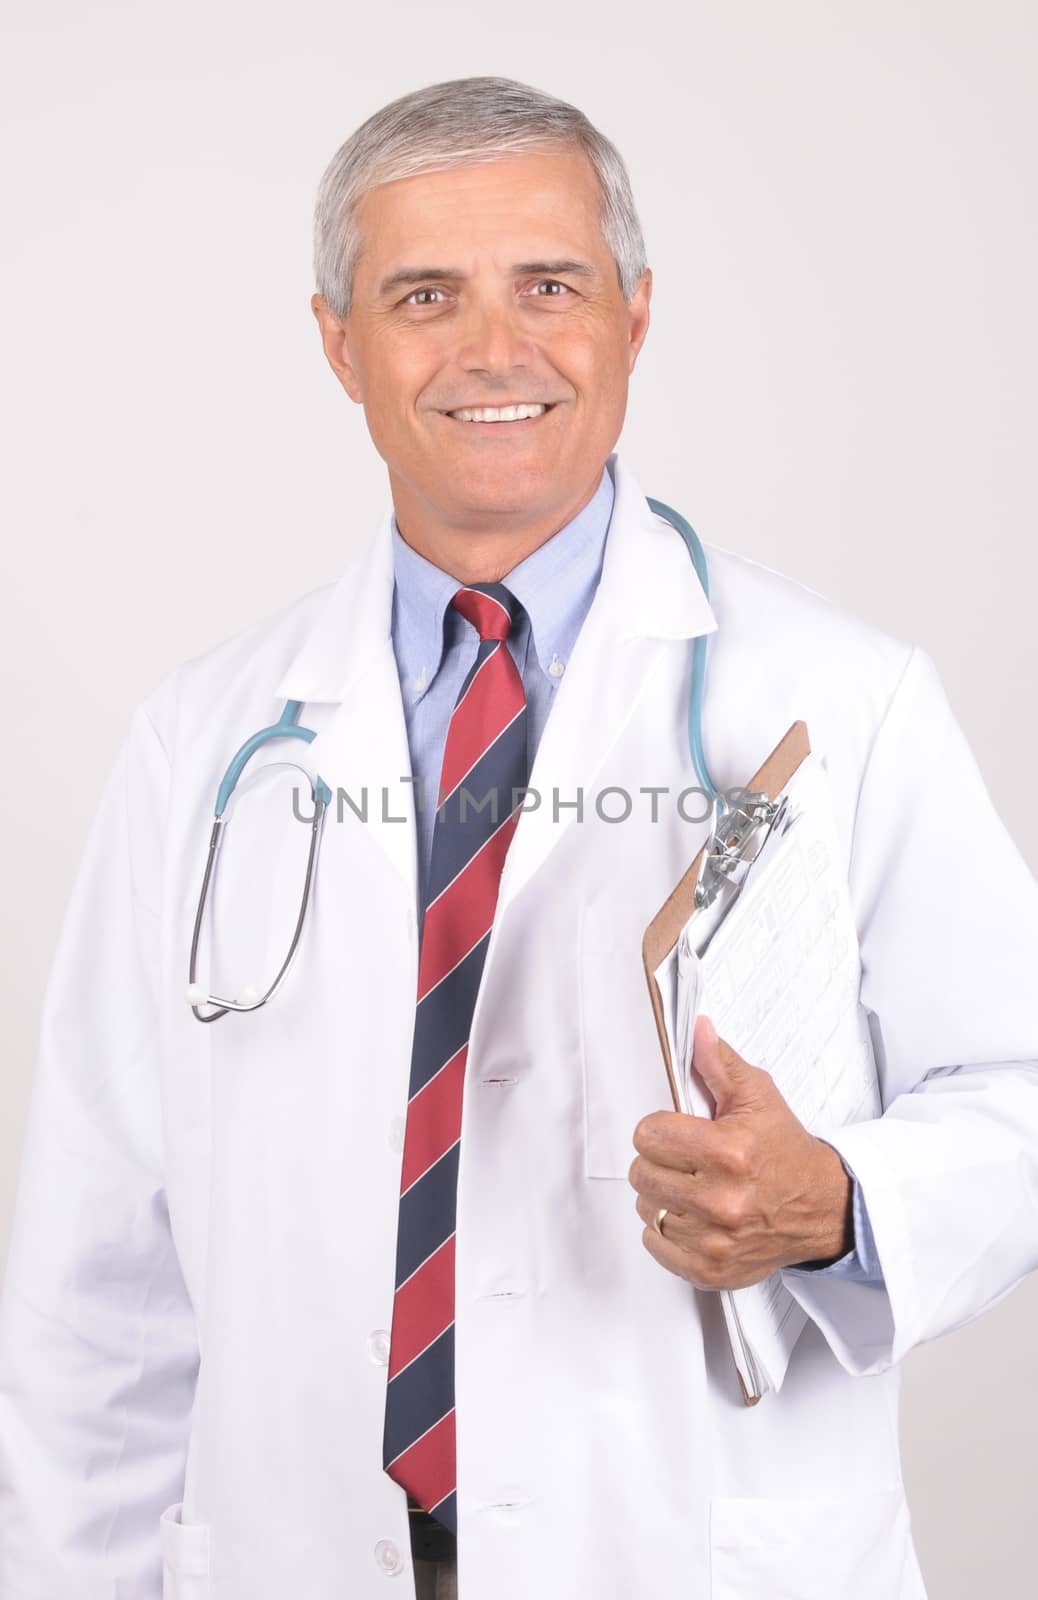 Smiling Mature Doctor in Lab Coat by sCukrov